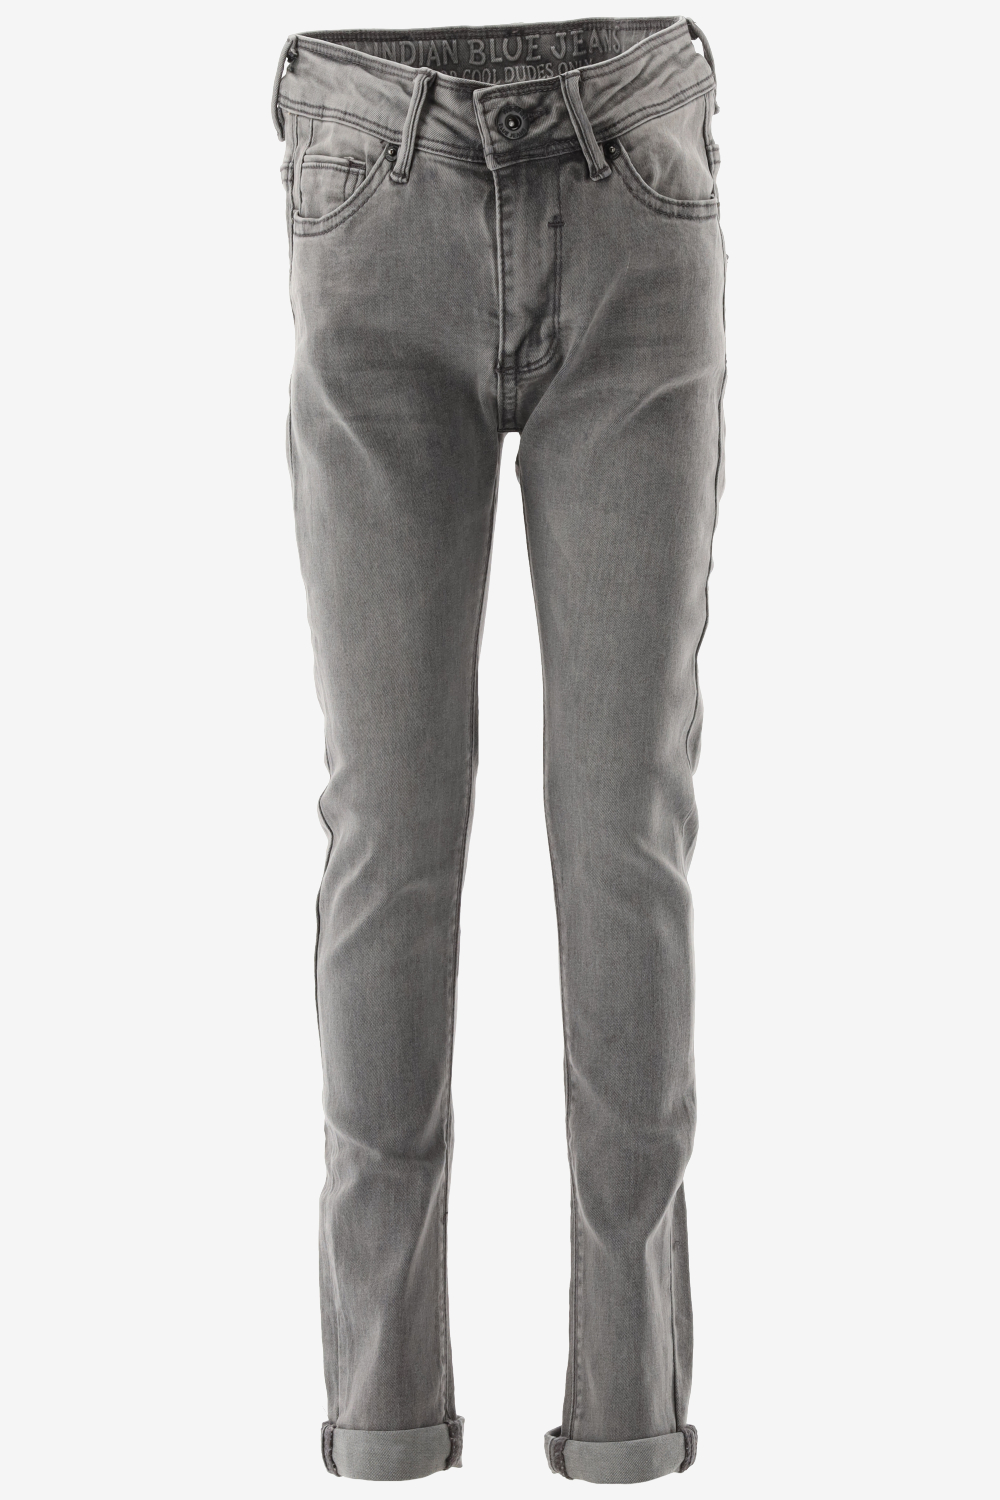 Indian blue tapered fit grey jay tapared fit maat 110/5J